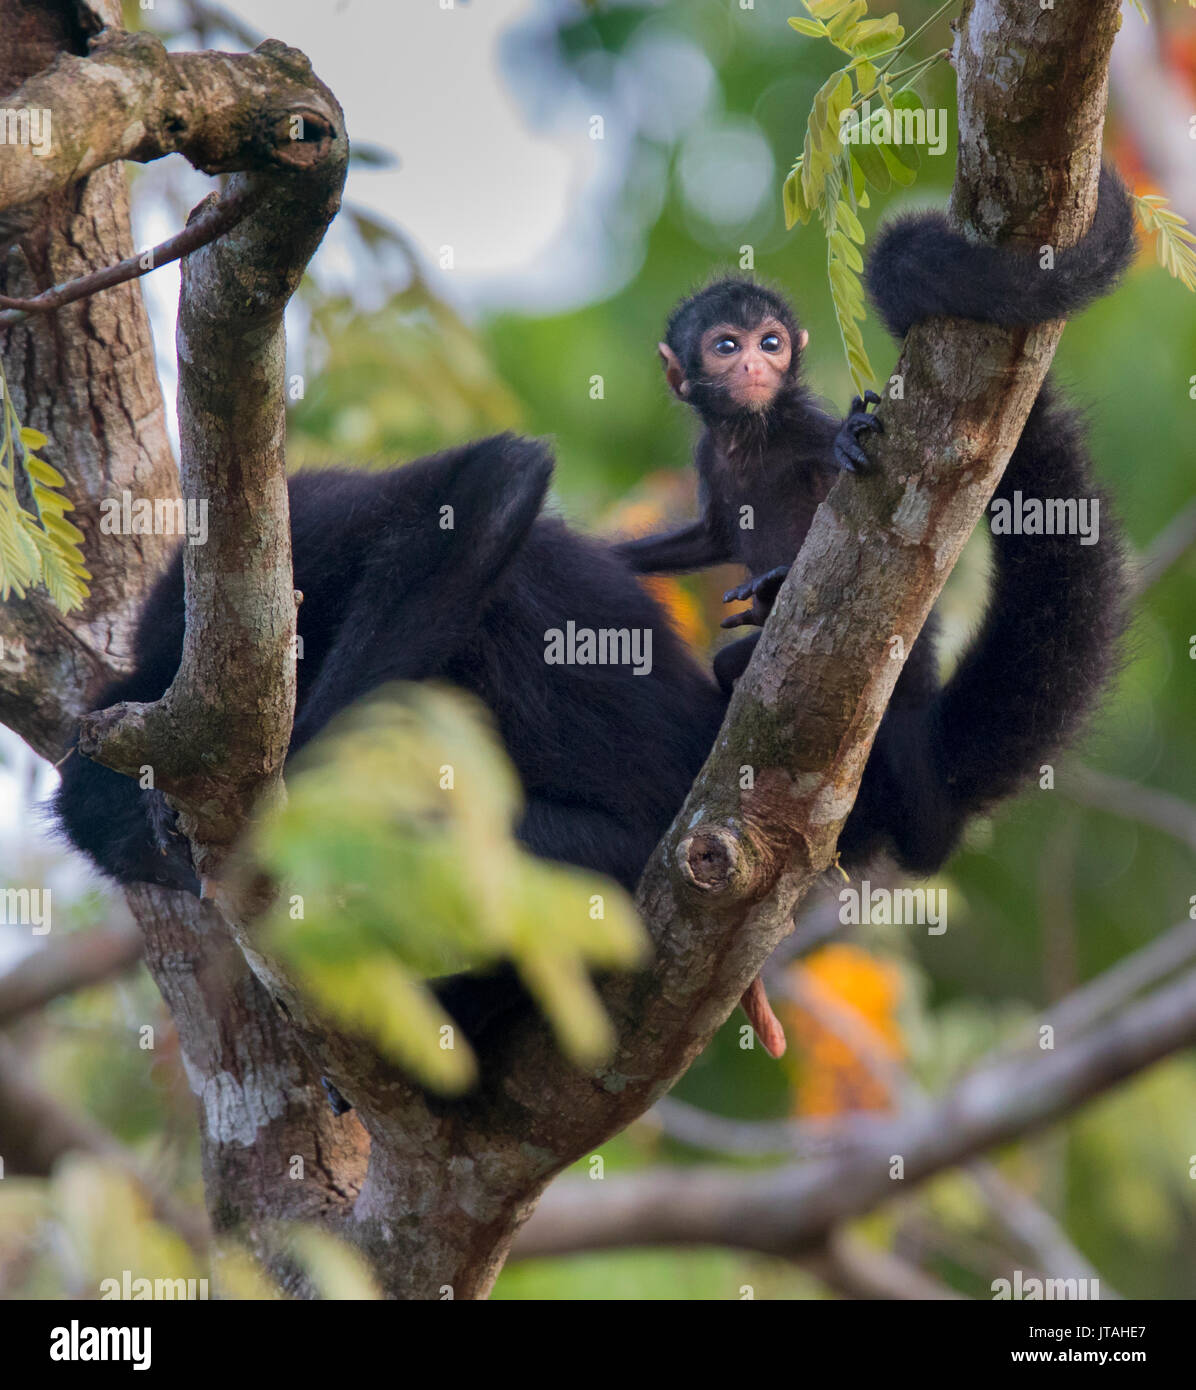 Black-headed Spider Monkey (Ateles fusciceps) mother and young, SoberanÃa National Park, Panama, Central America. Critically endangered species. Stock Photo